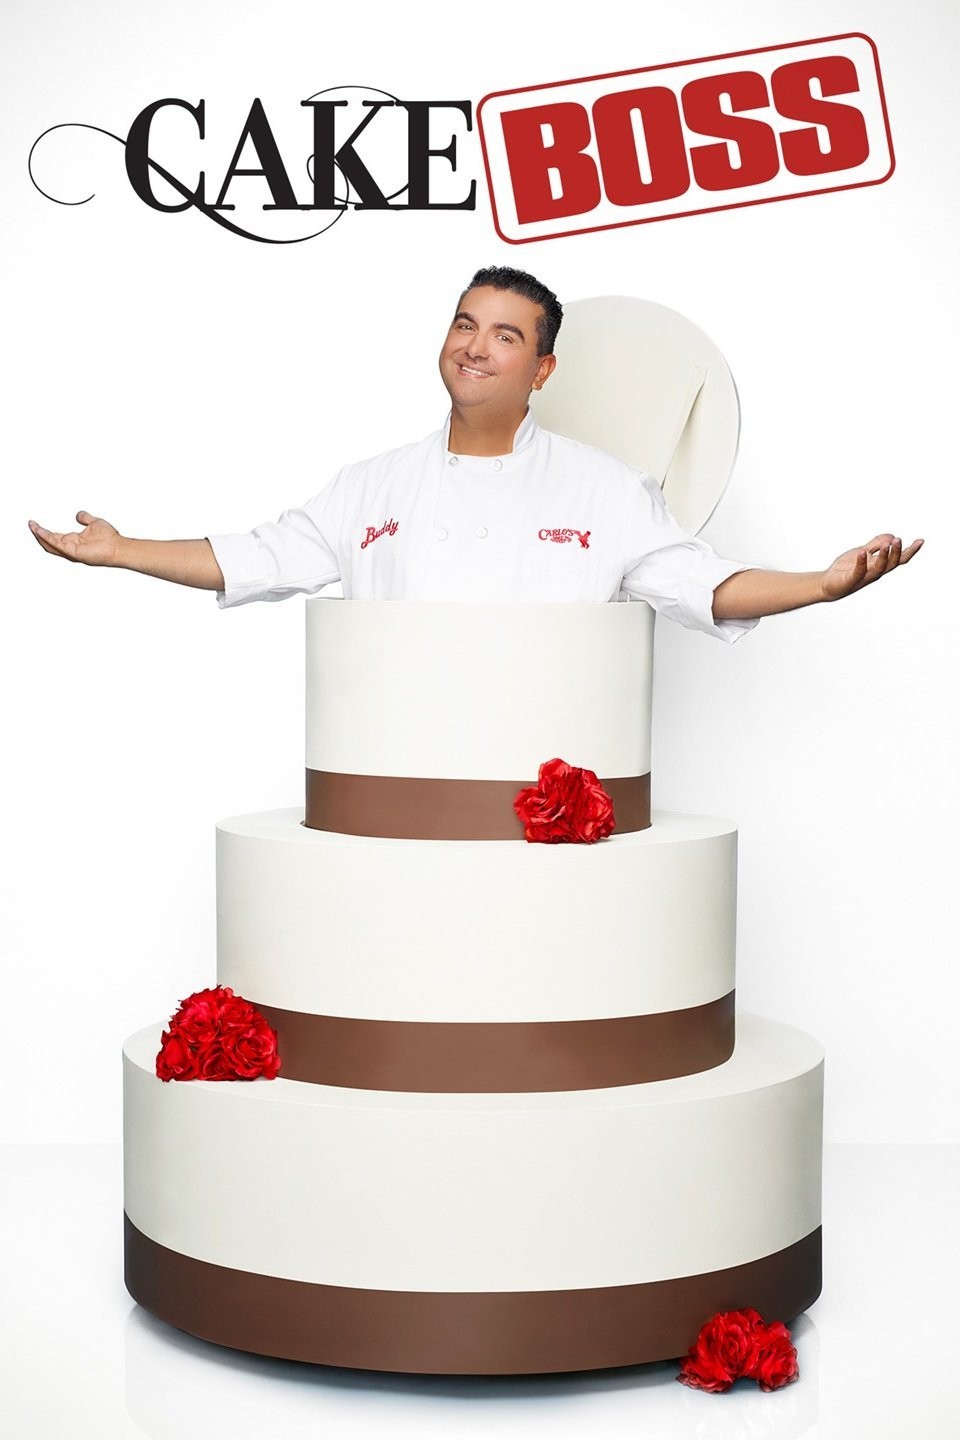 Cake Boss' to sell his creations nationwide – The Mercury